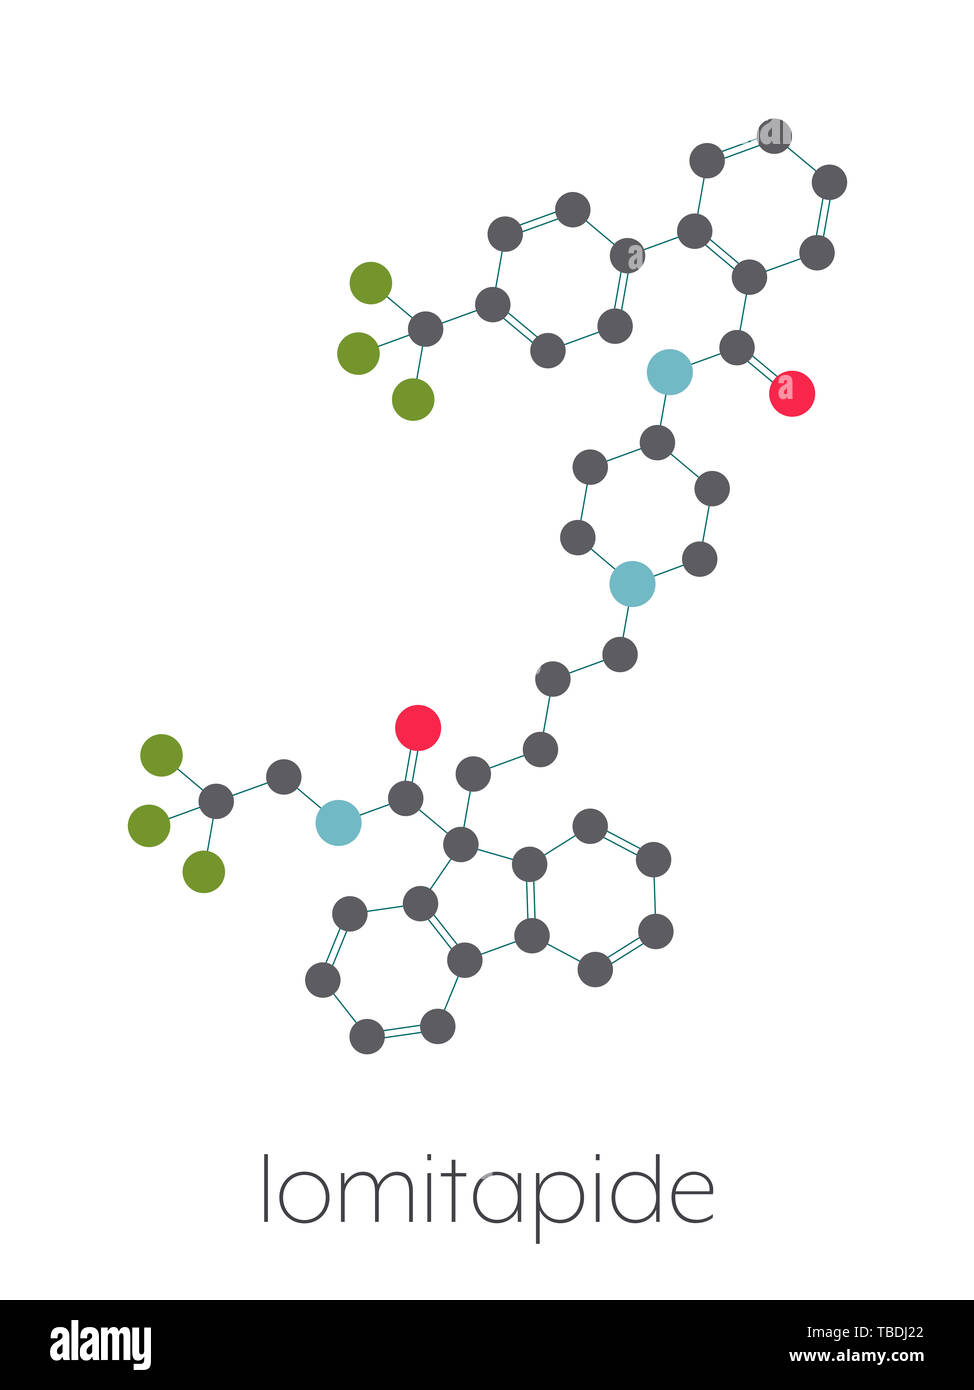 Lomitapide cholesterol lowering drug molecule. Used in treatment of homozygous familial hypercholesterolemia. Stylized skeletal formula (chemical structure). Atoms are shown as color-coded circles connected by thin bonds, on a white background: hydrogen (hidden), carbon (grey), oxygen (red), nitrogen (blue), fluorine (green). Stock Photo